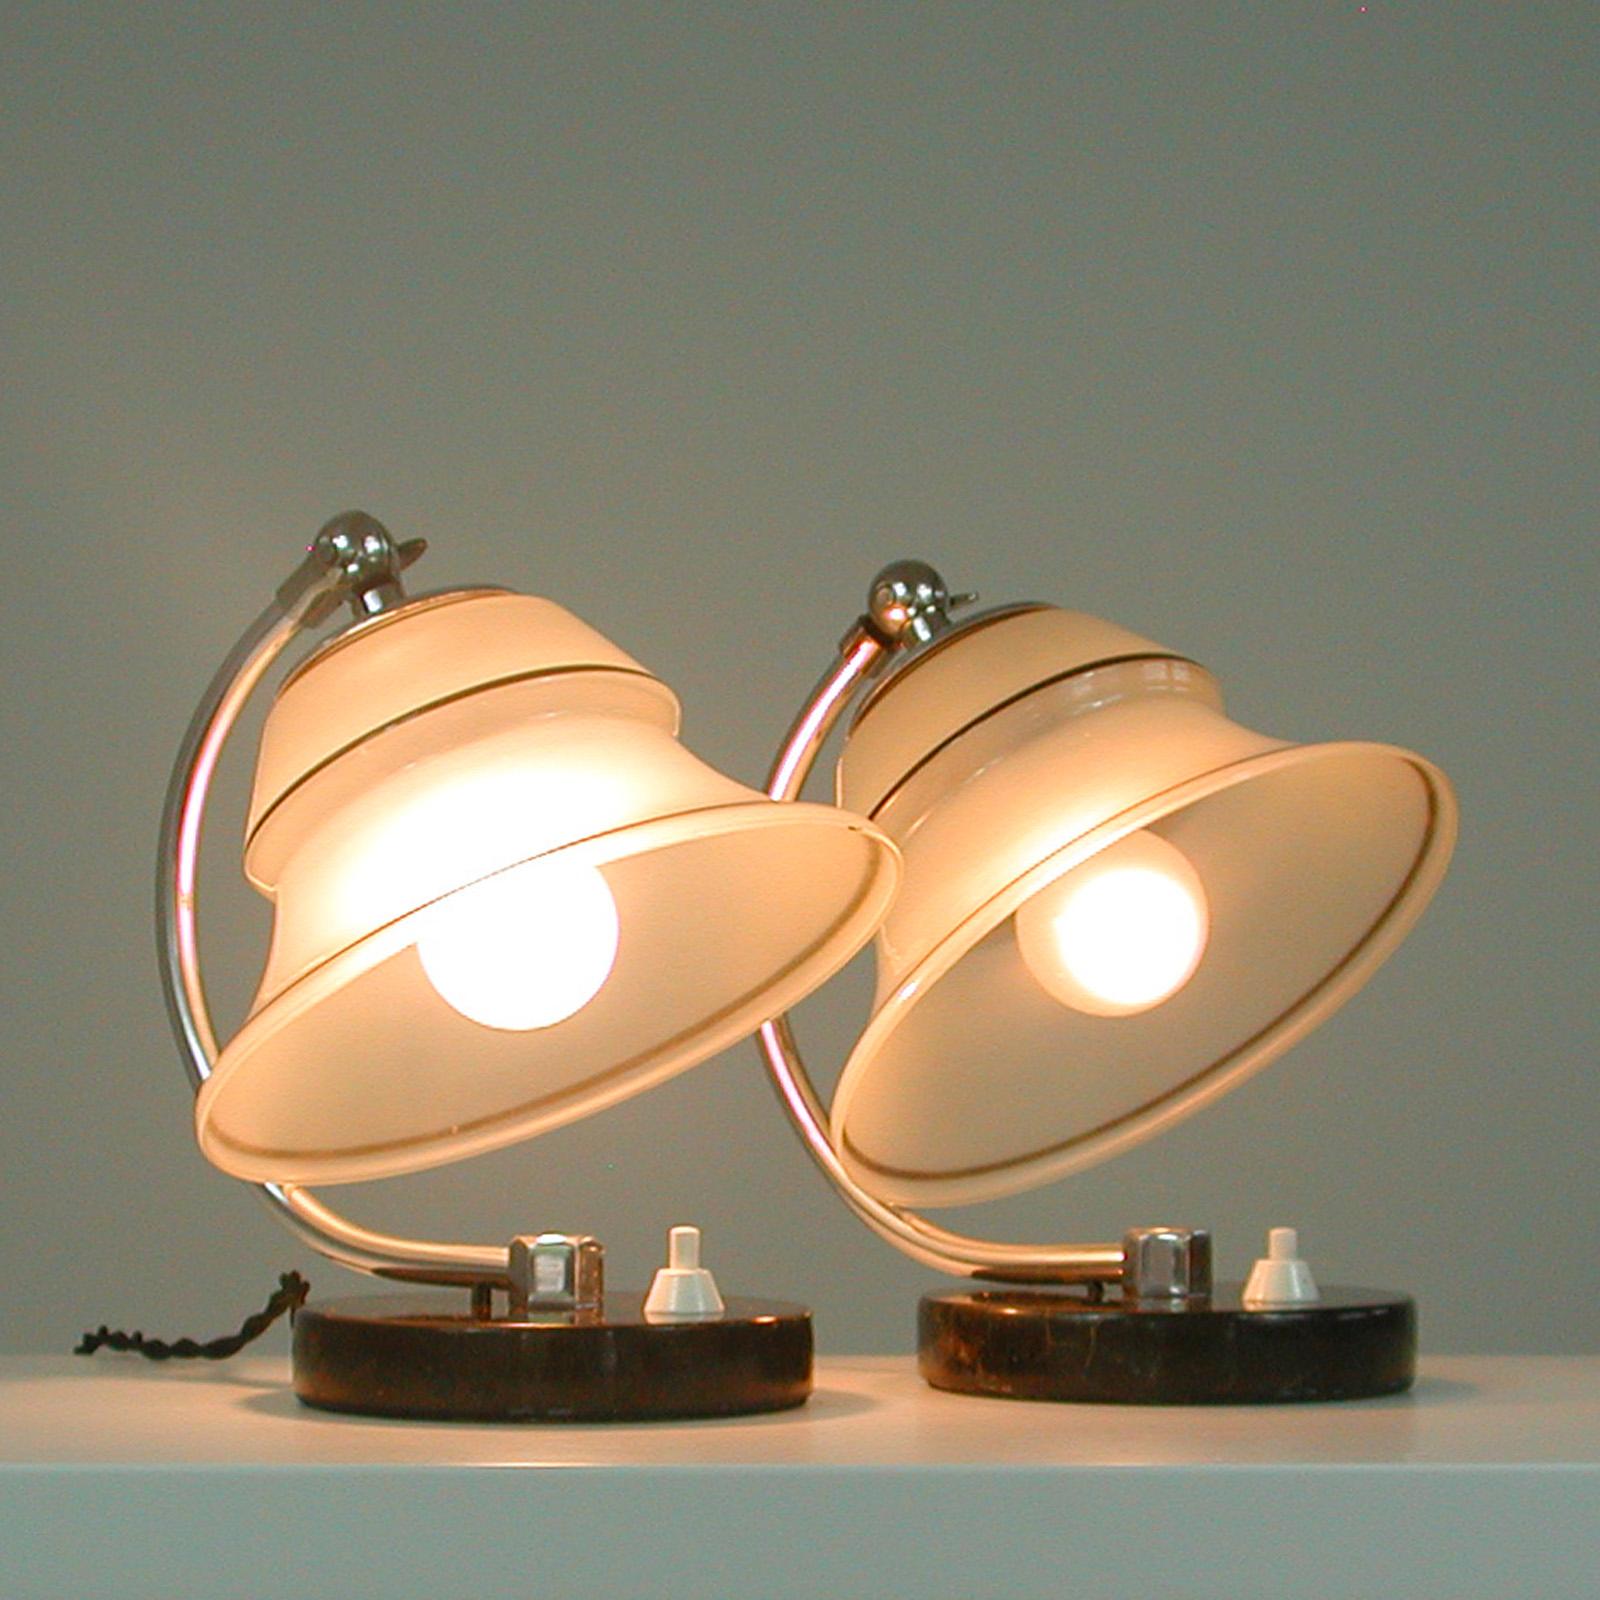 German Art Deco Enameled Satin Glass, Marble and Aluminum Table Lamps, 1930s For Sale 3